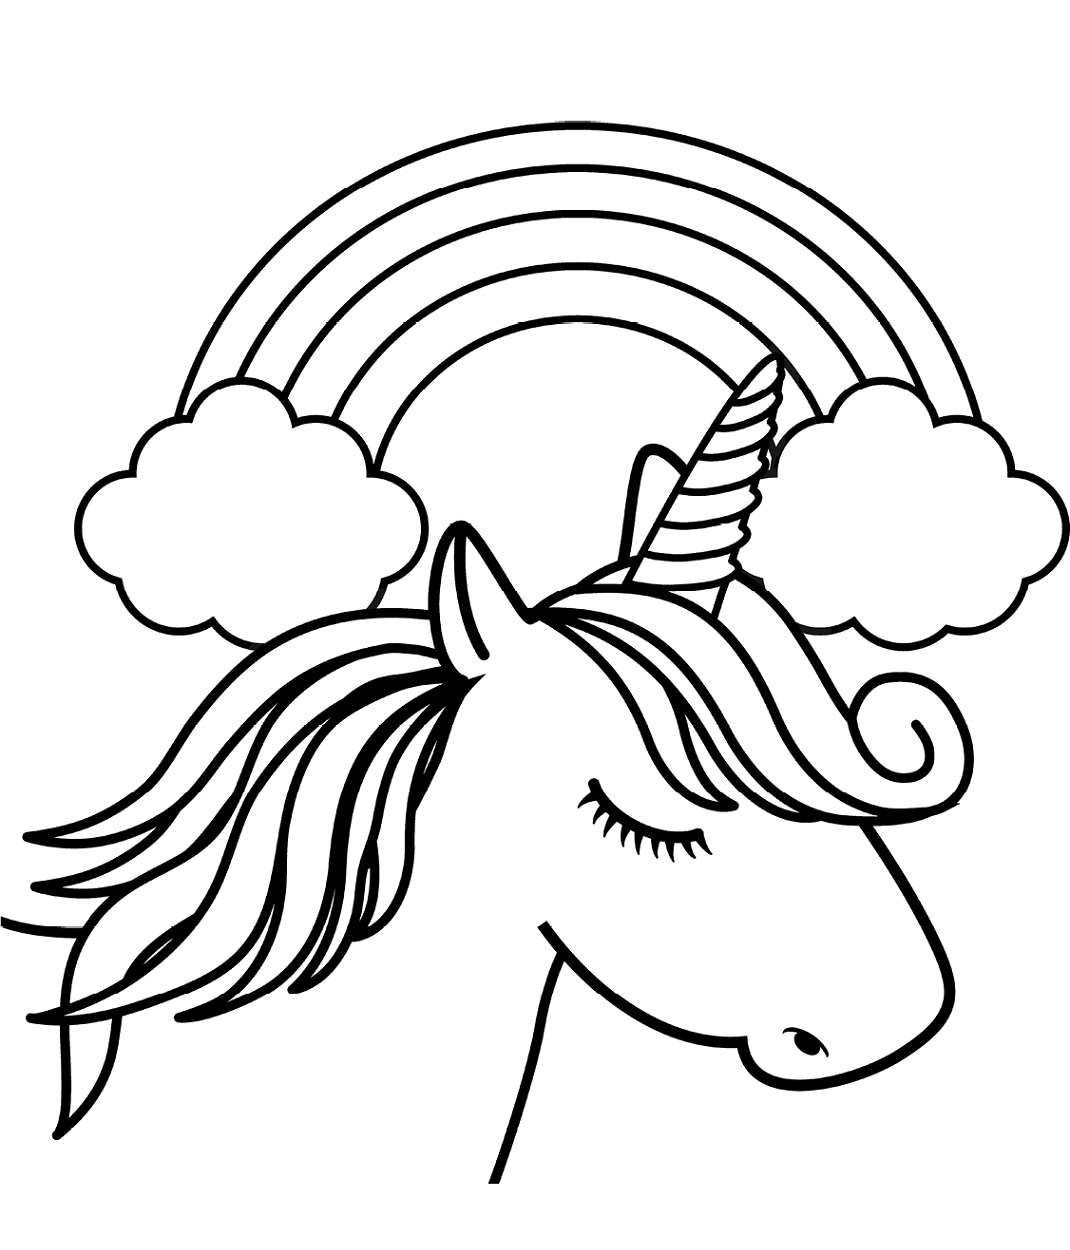 Download Unicorn Head In Front Of Rainbow Coloring Page Free Printable Coloring Pages For Kids